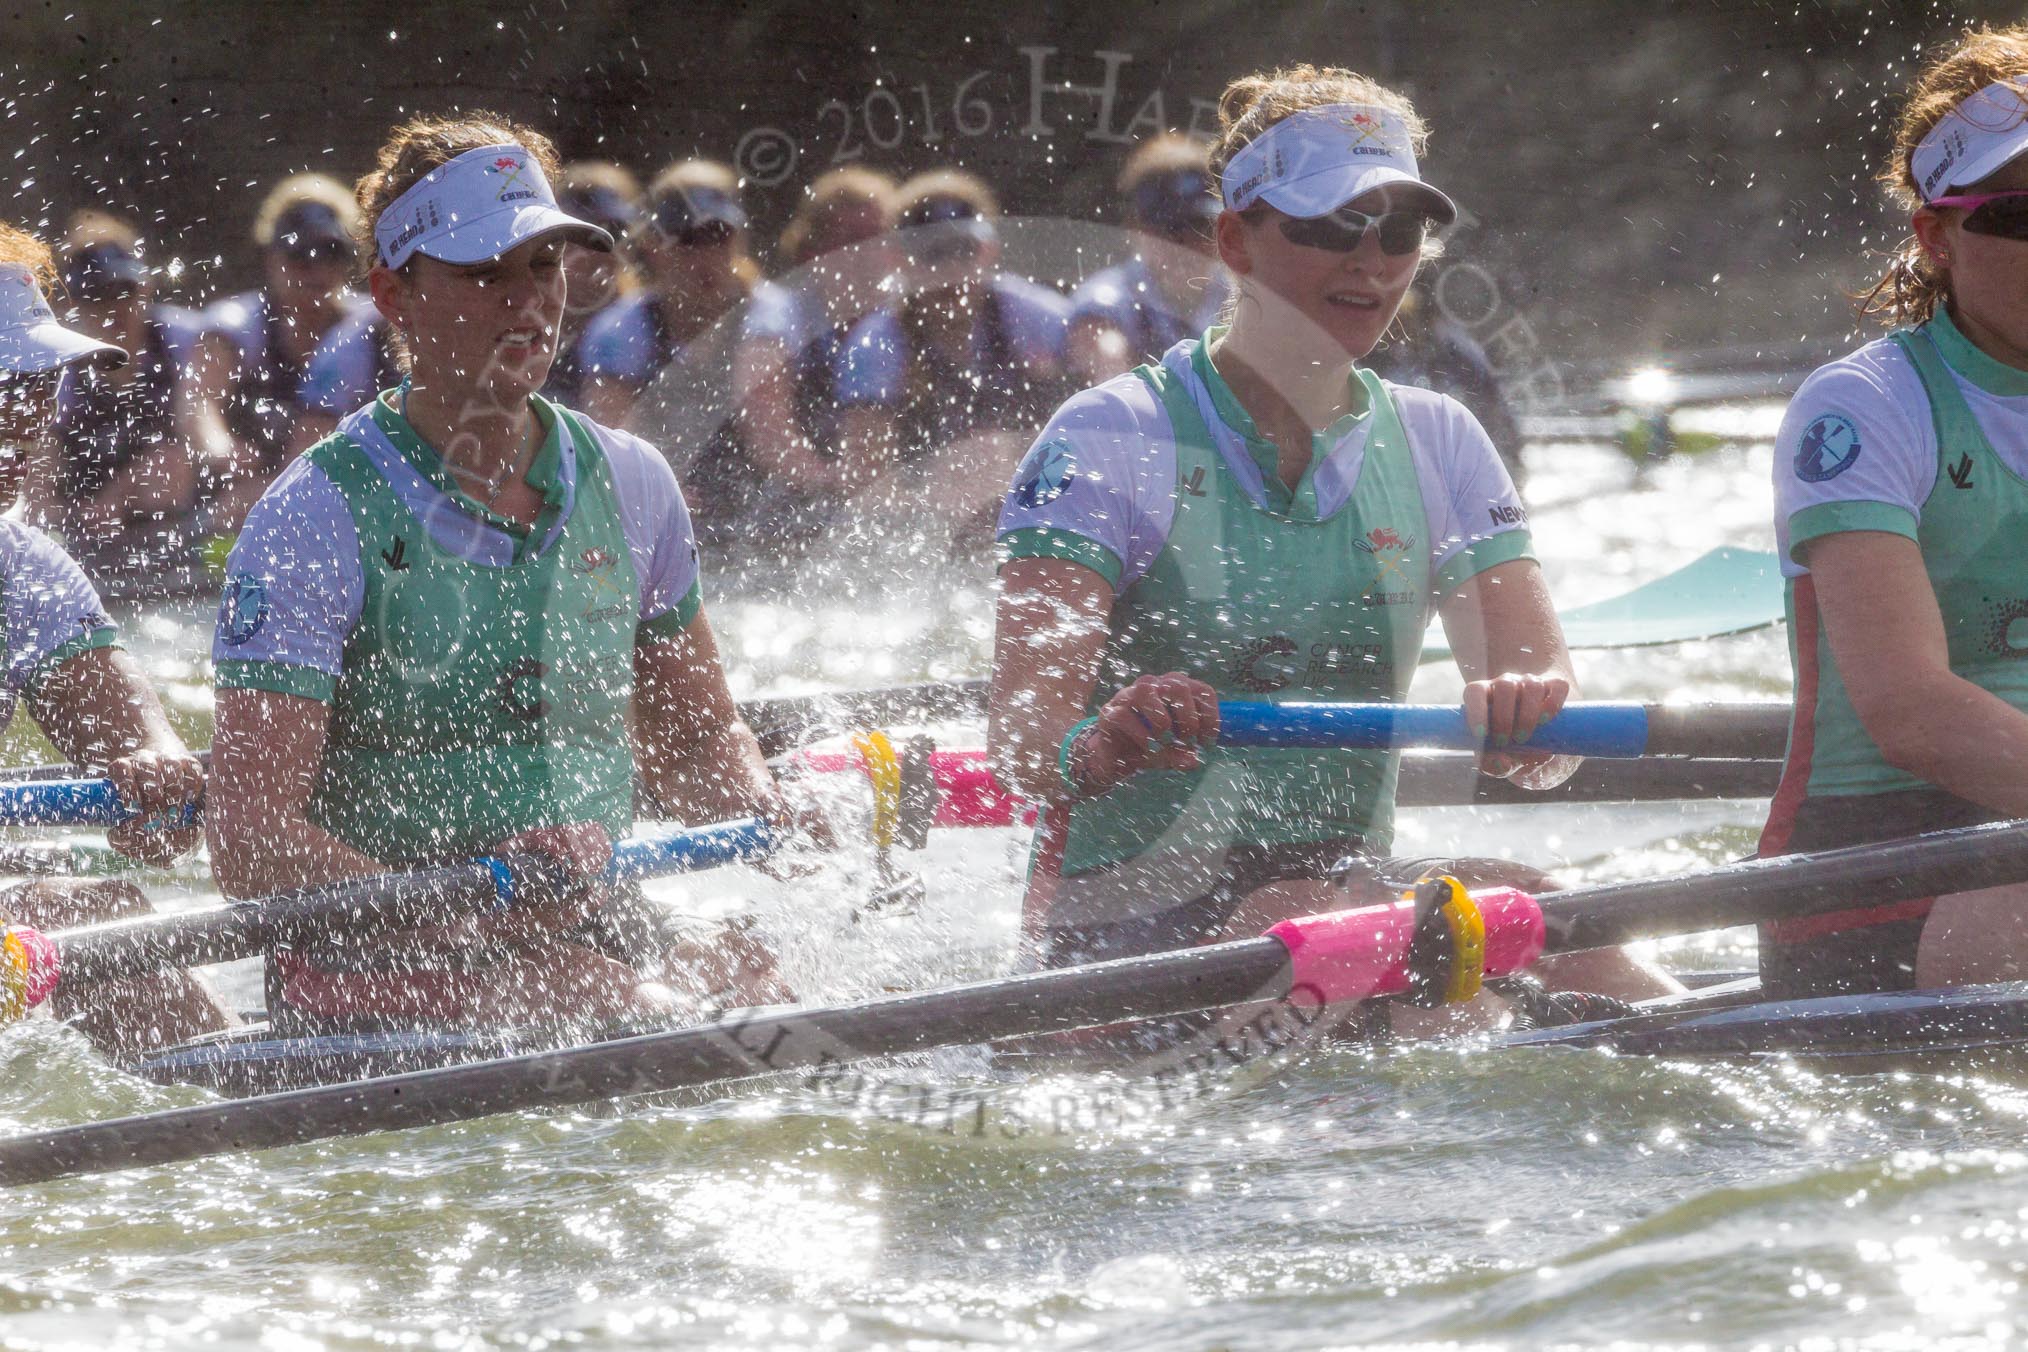 The Boat Race season 2016 -  The Cancer Research Women's Boat Race.
River Thames between Putney Bridge and Mortlake,
London SW15,

United Kingdom,
on 27 March 2016 at 14:25, image #285